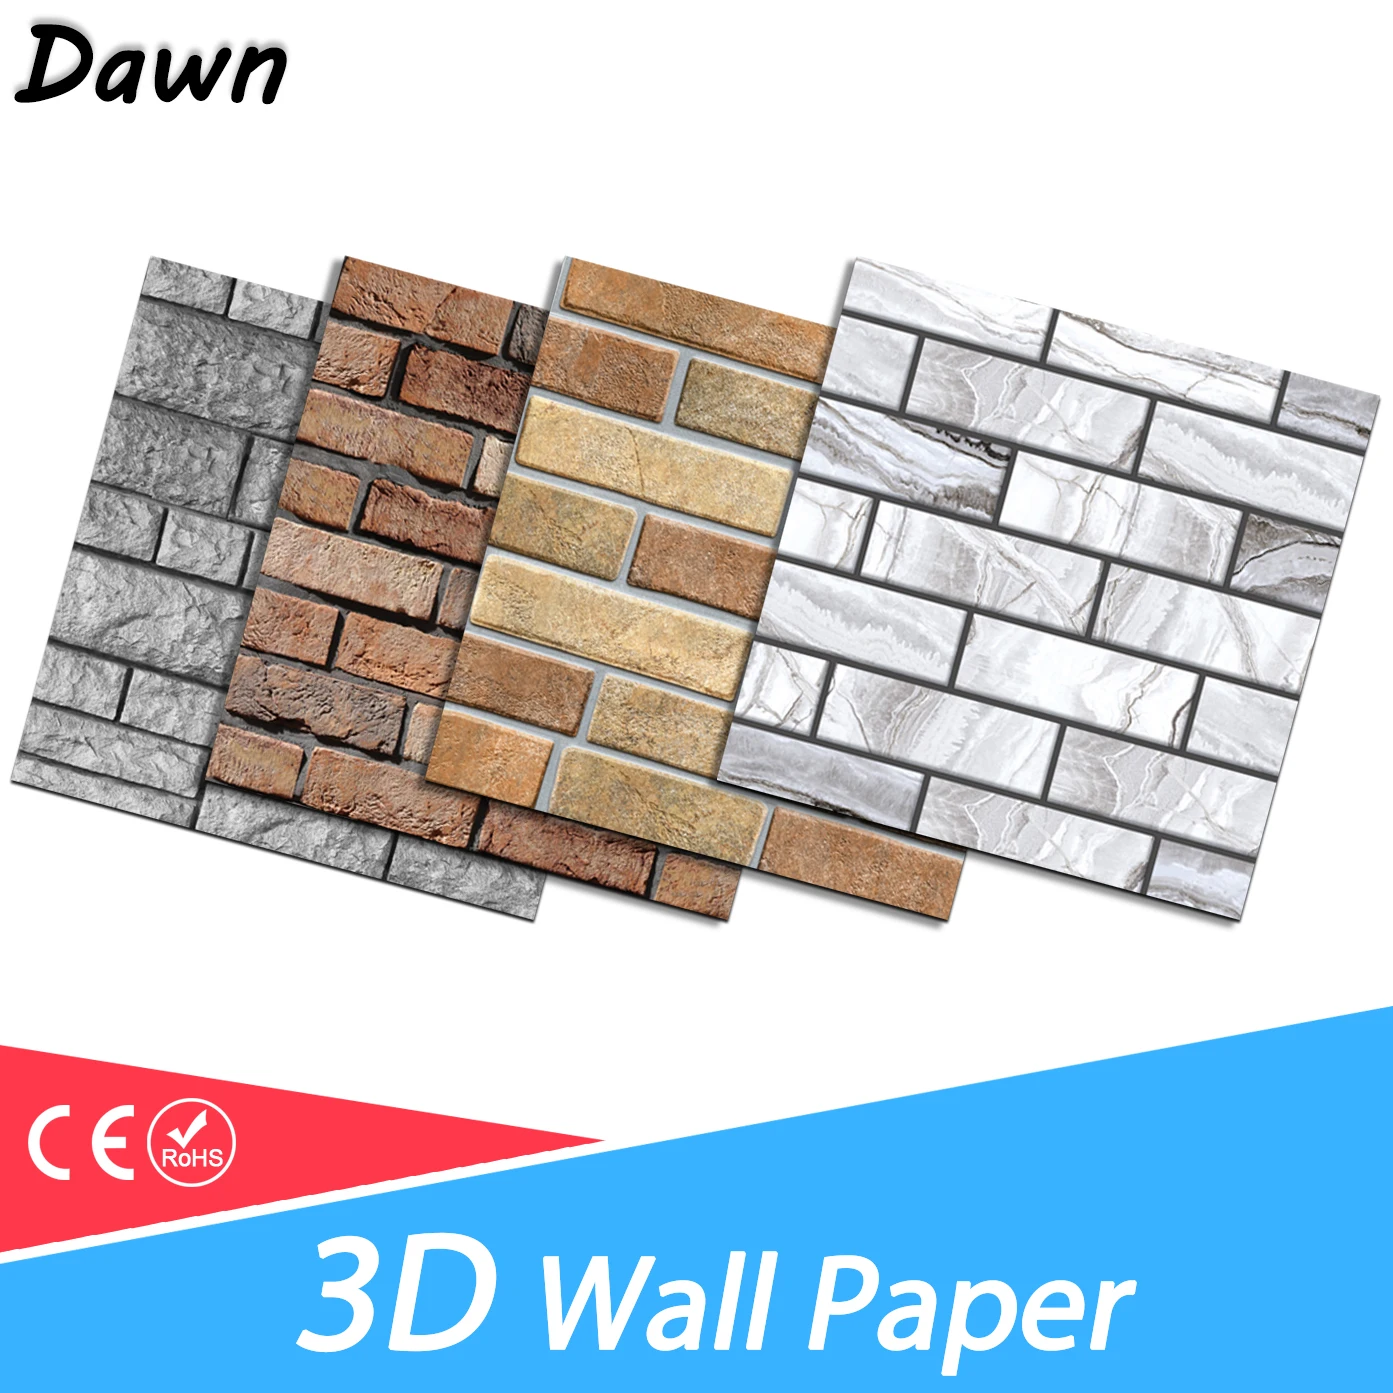 3D Wall paper Marble Brick Peel and Self-Adhesive Wall Stickers Waterproof DIY Kitchen Bathroom Home Wall Stick PVC Tiles Panel